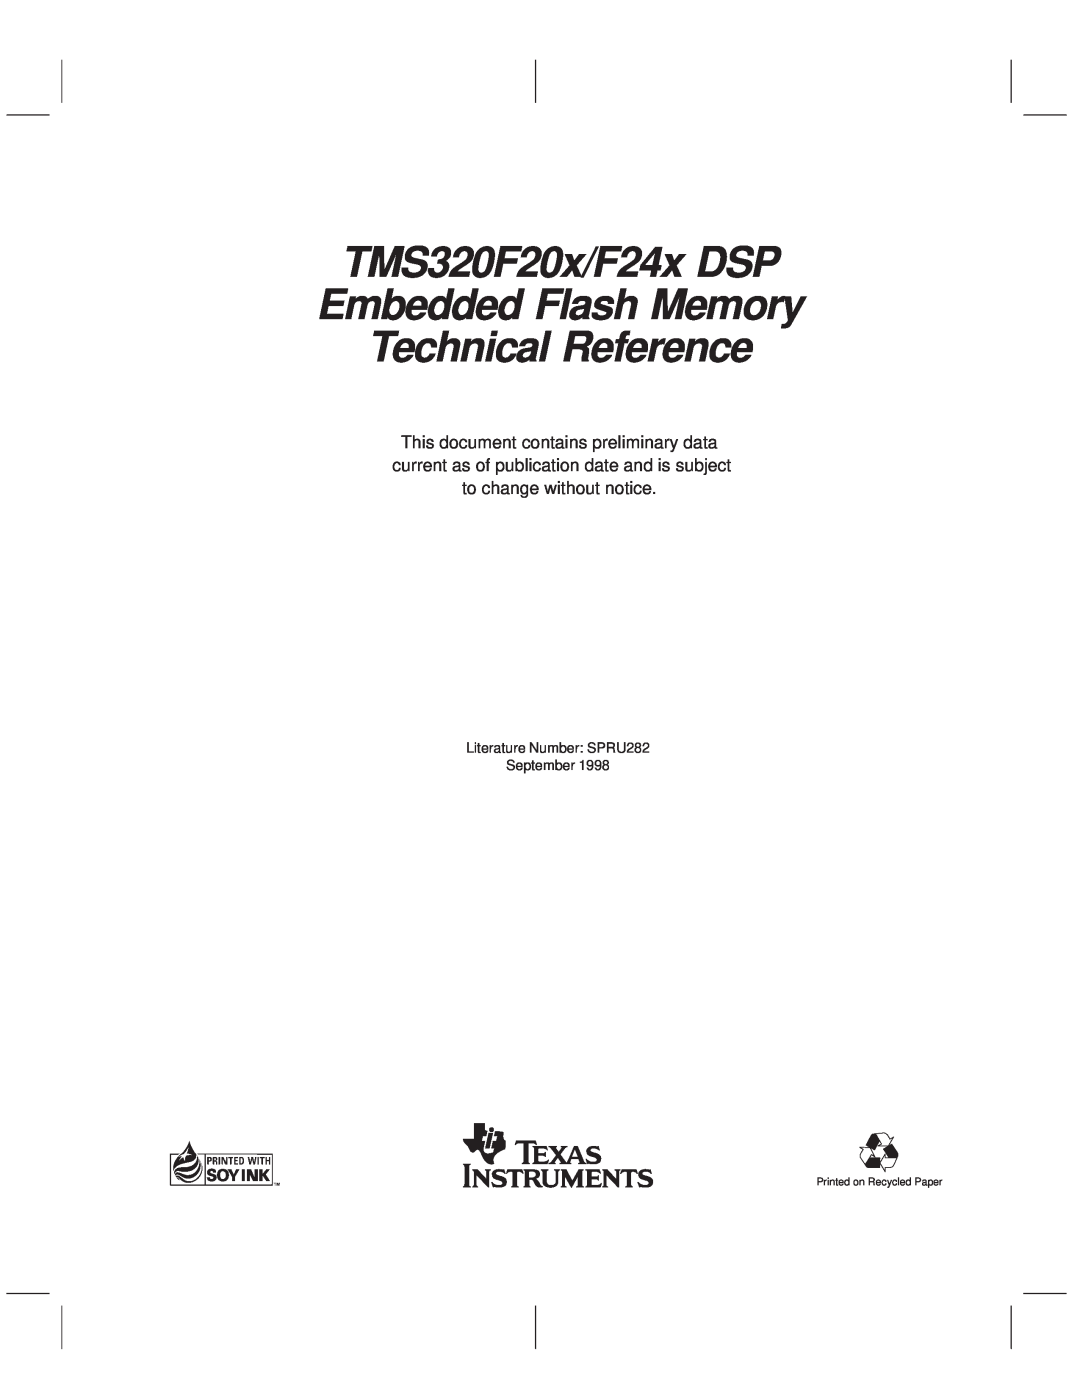 Texas Instruments manual TMS320F20x/F24x DSP Embedded Flash Memory Technical Reference, Printed on Recycled Paper 